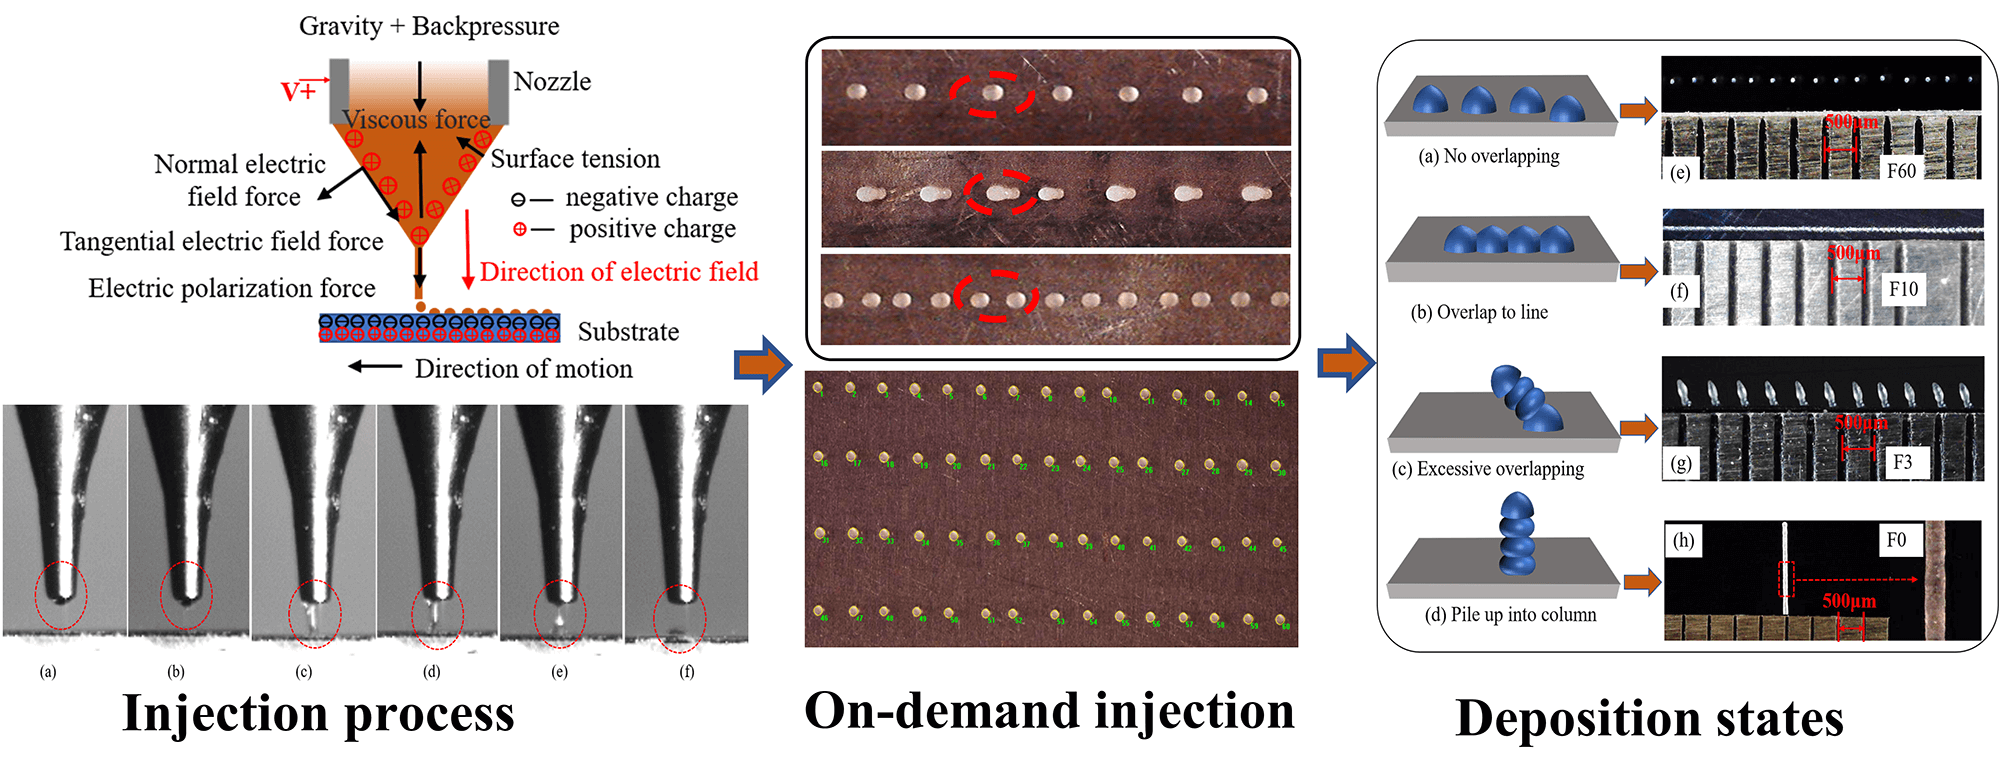 Design and Experimental Testing of an Electric Field-Driven Droplet Injection Device